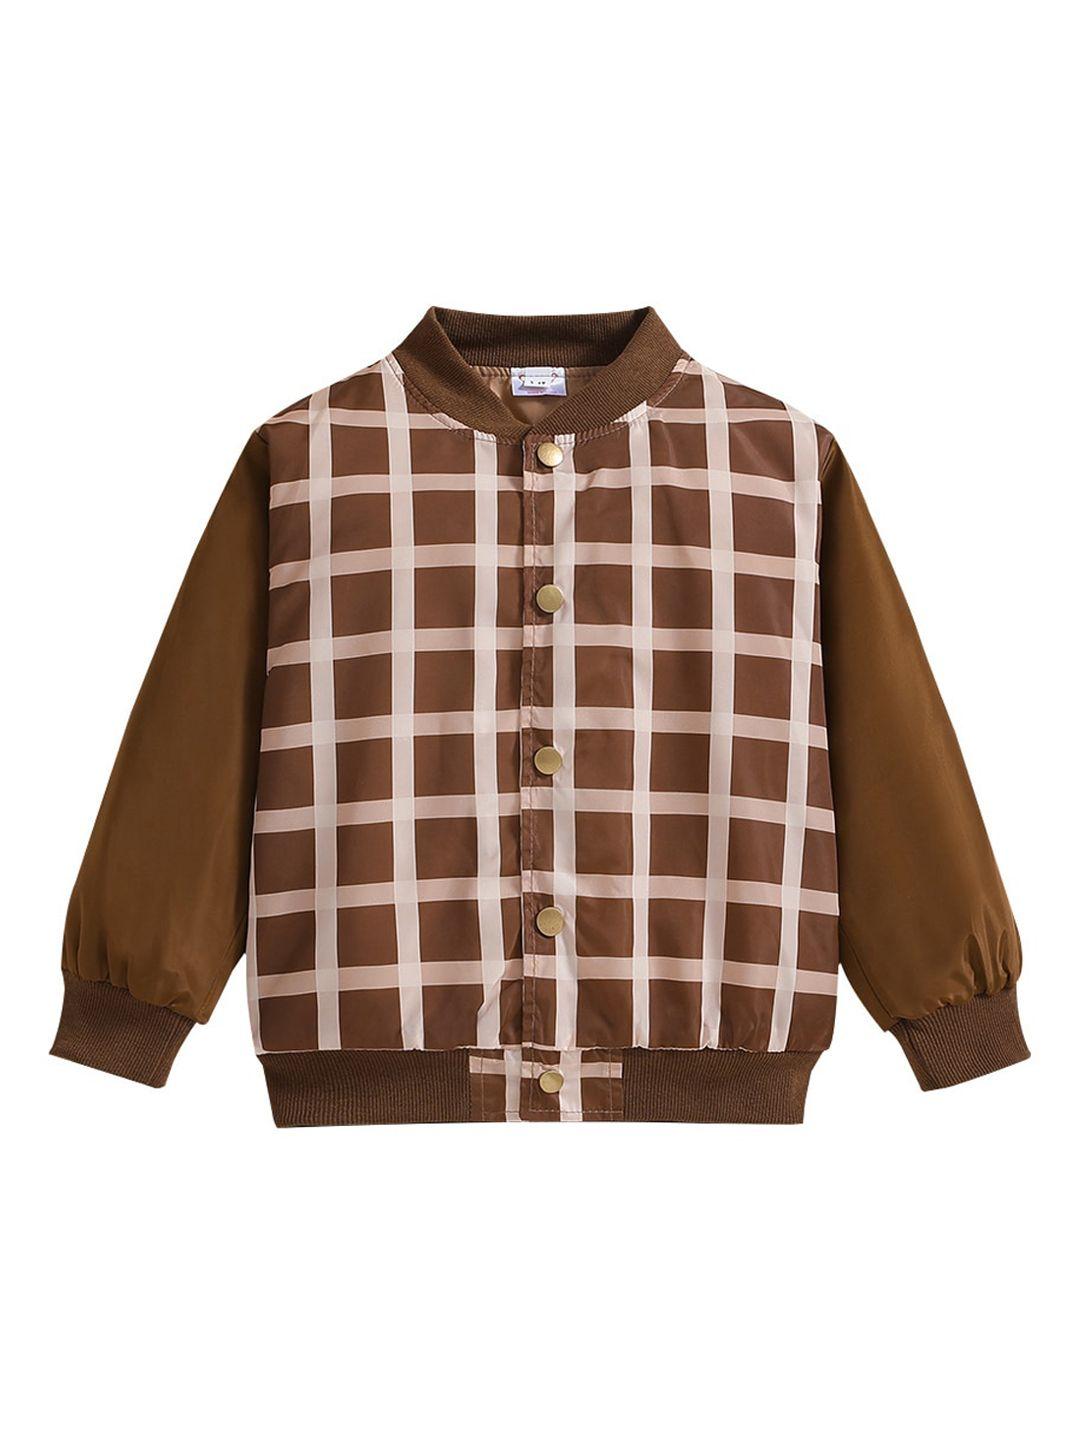 stylecast boys brown checked insulator tailored jacket